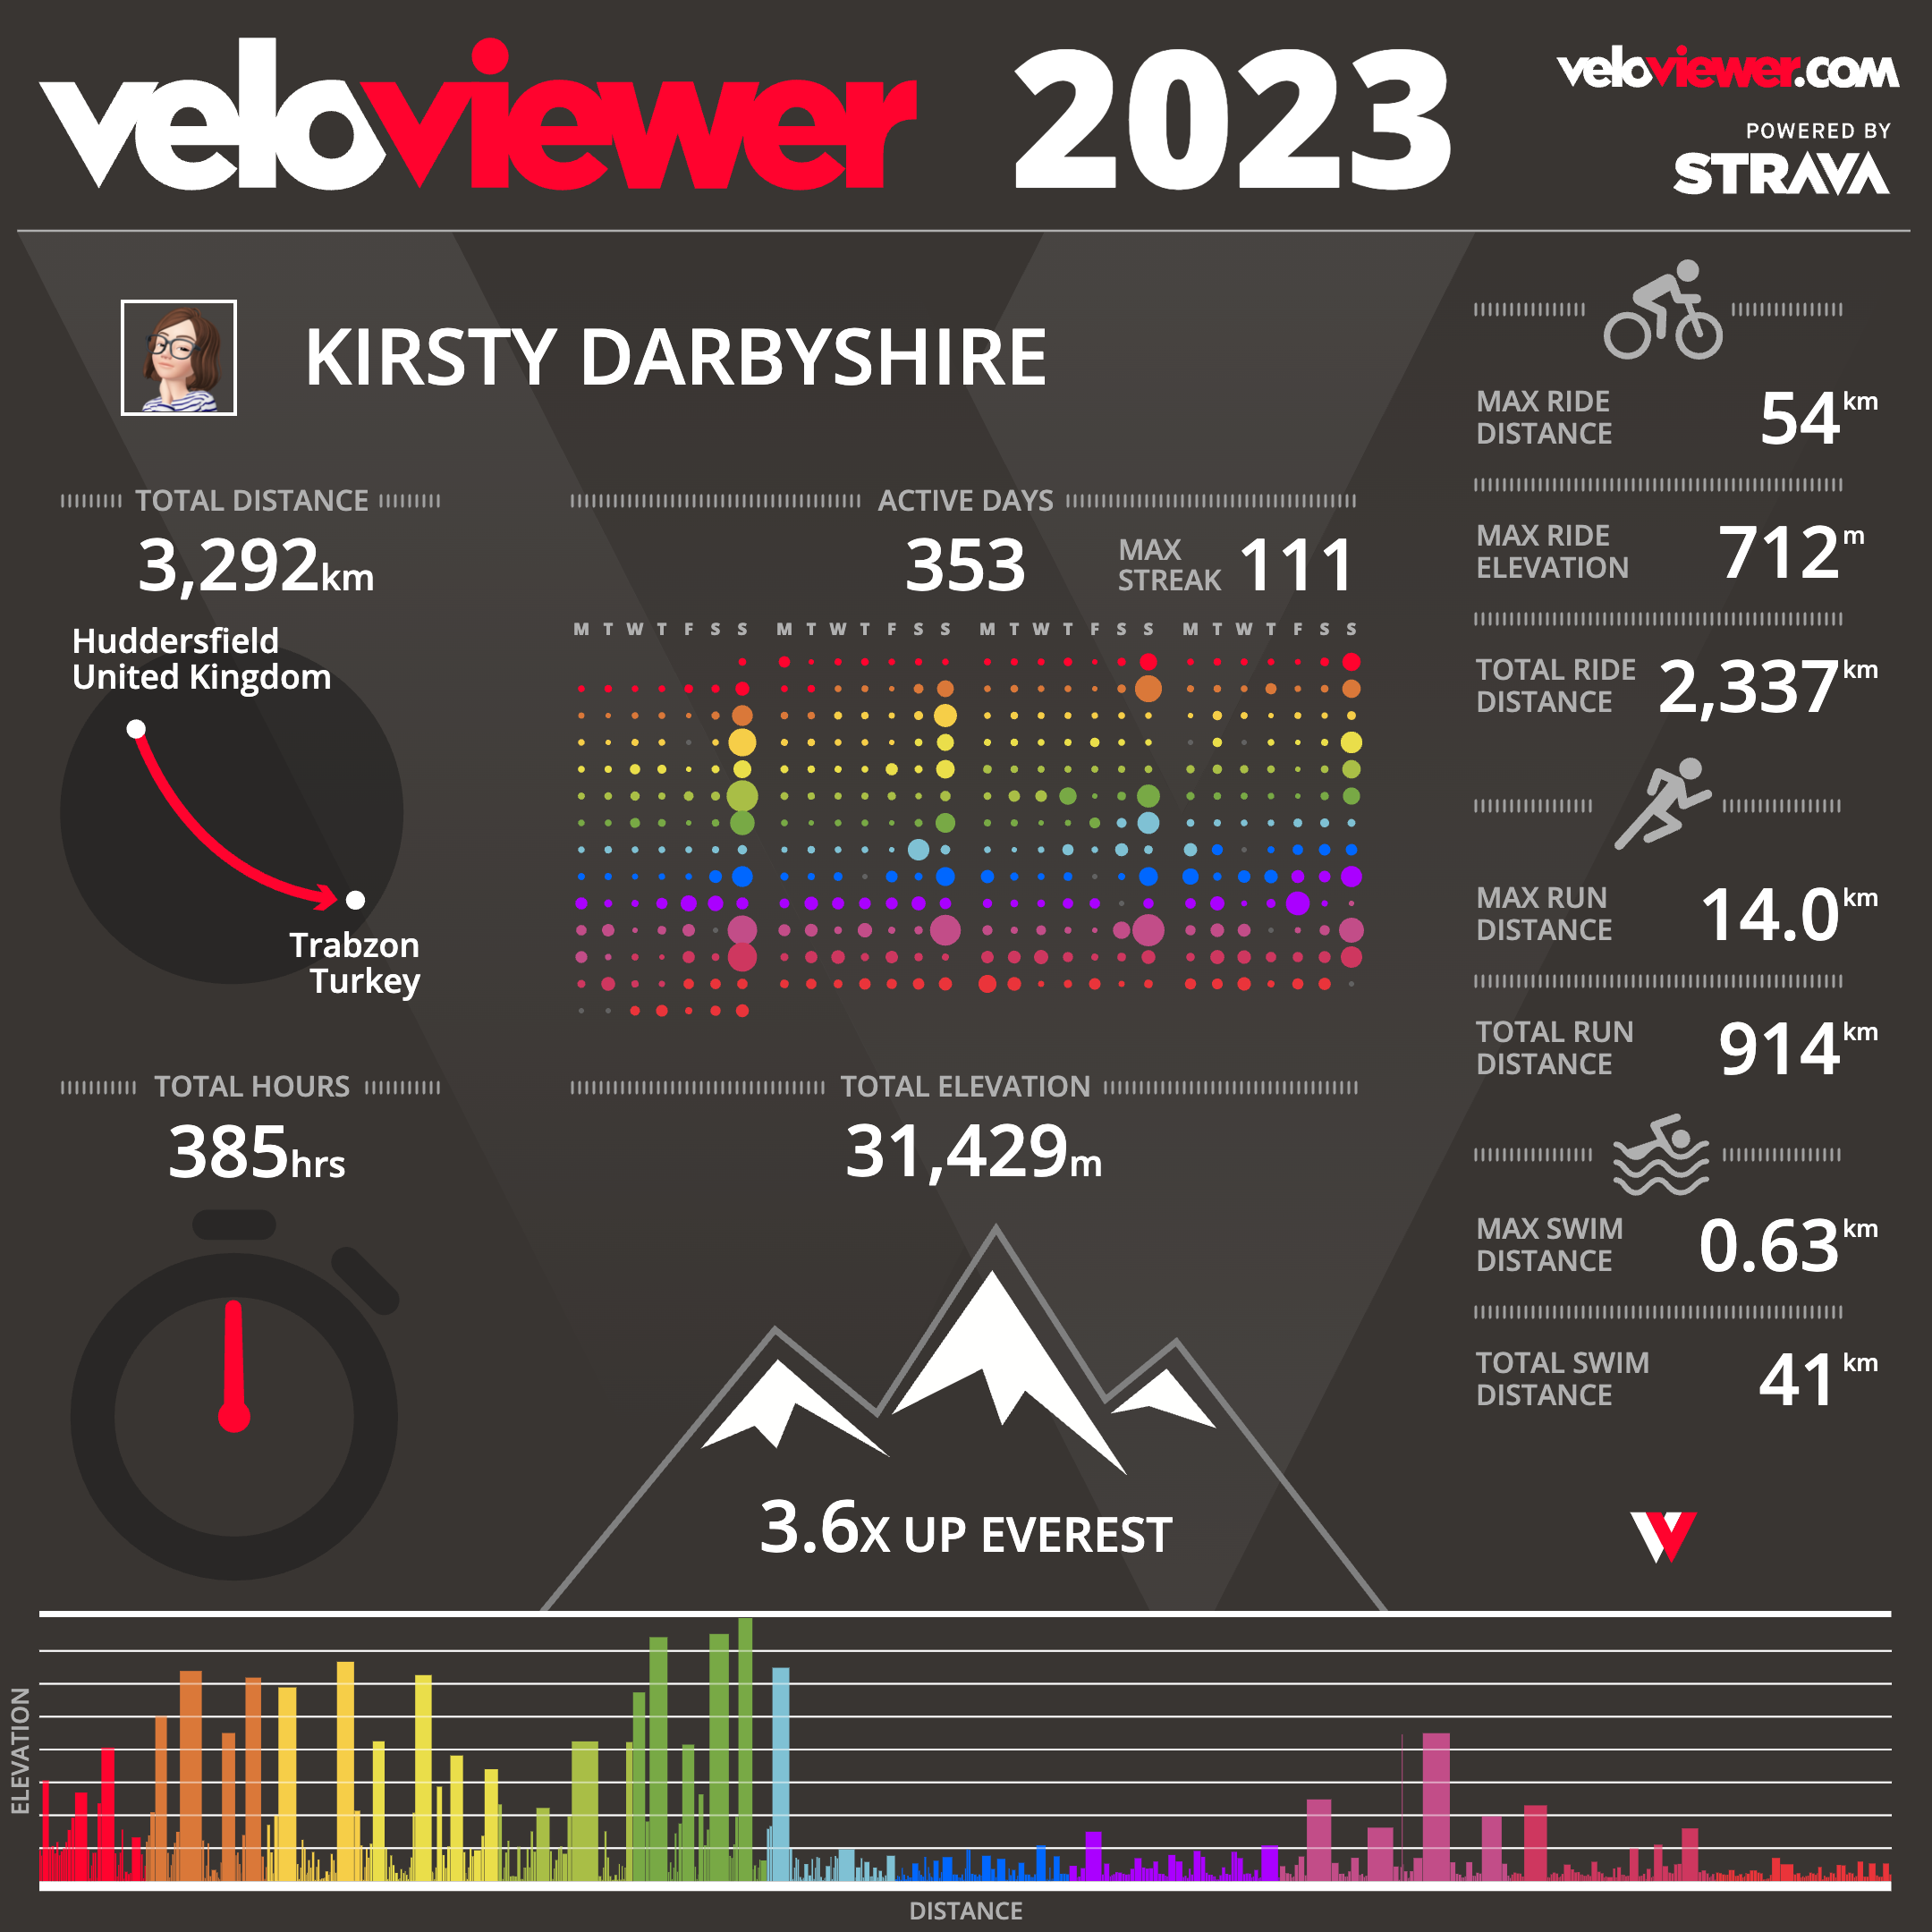 Featured image for 2023 in Veloviewer